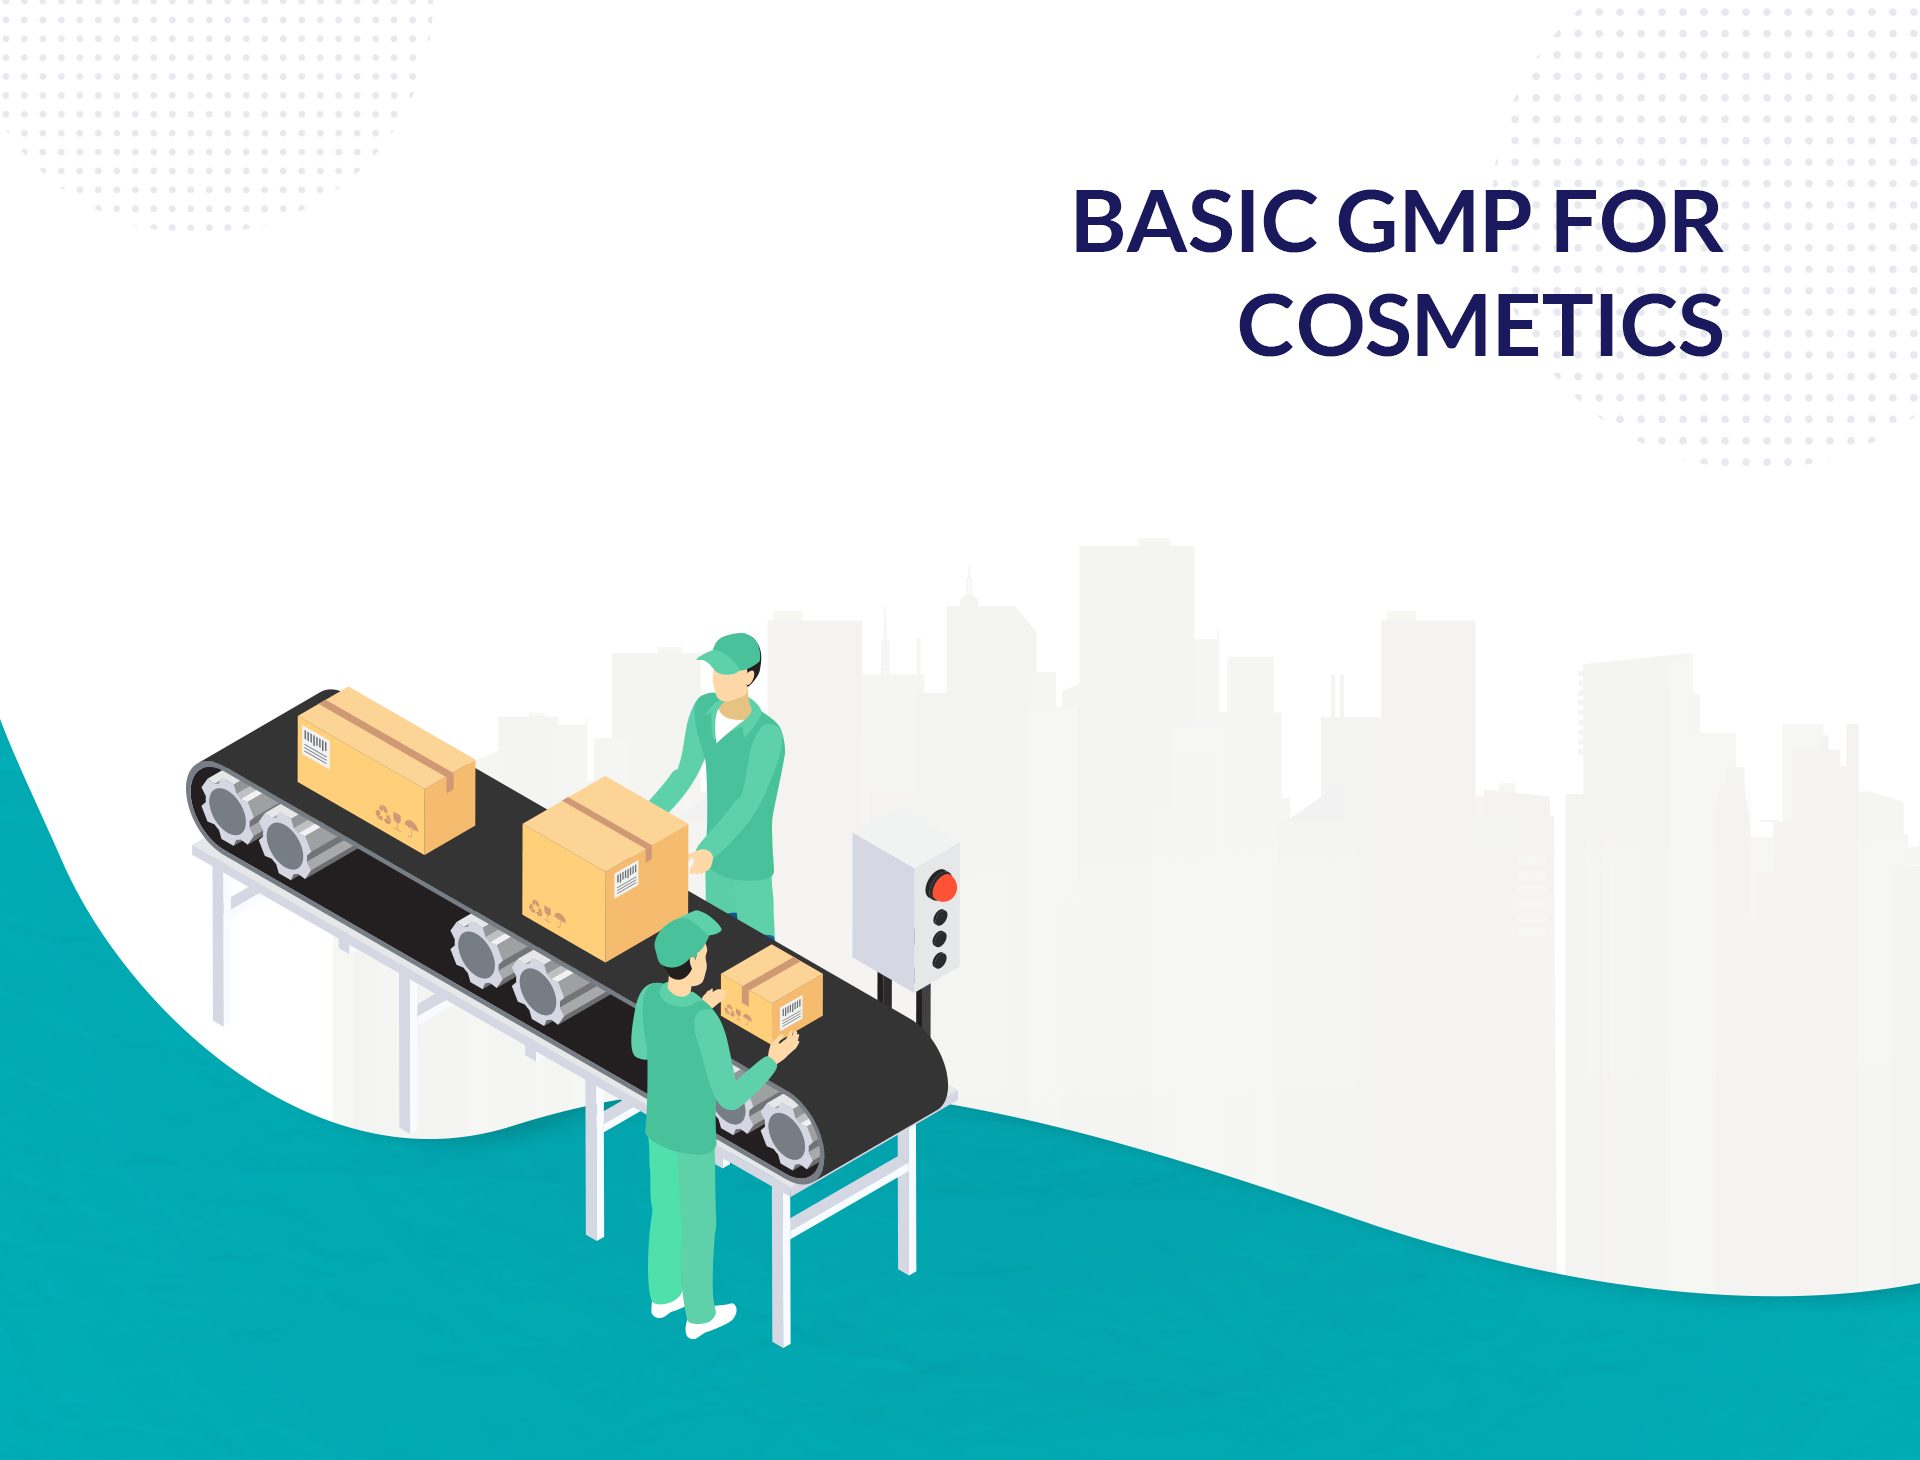 Basic GMP for Cosmetics